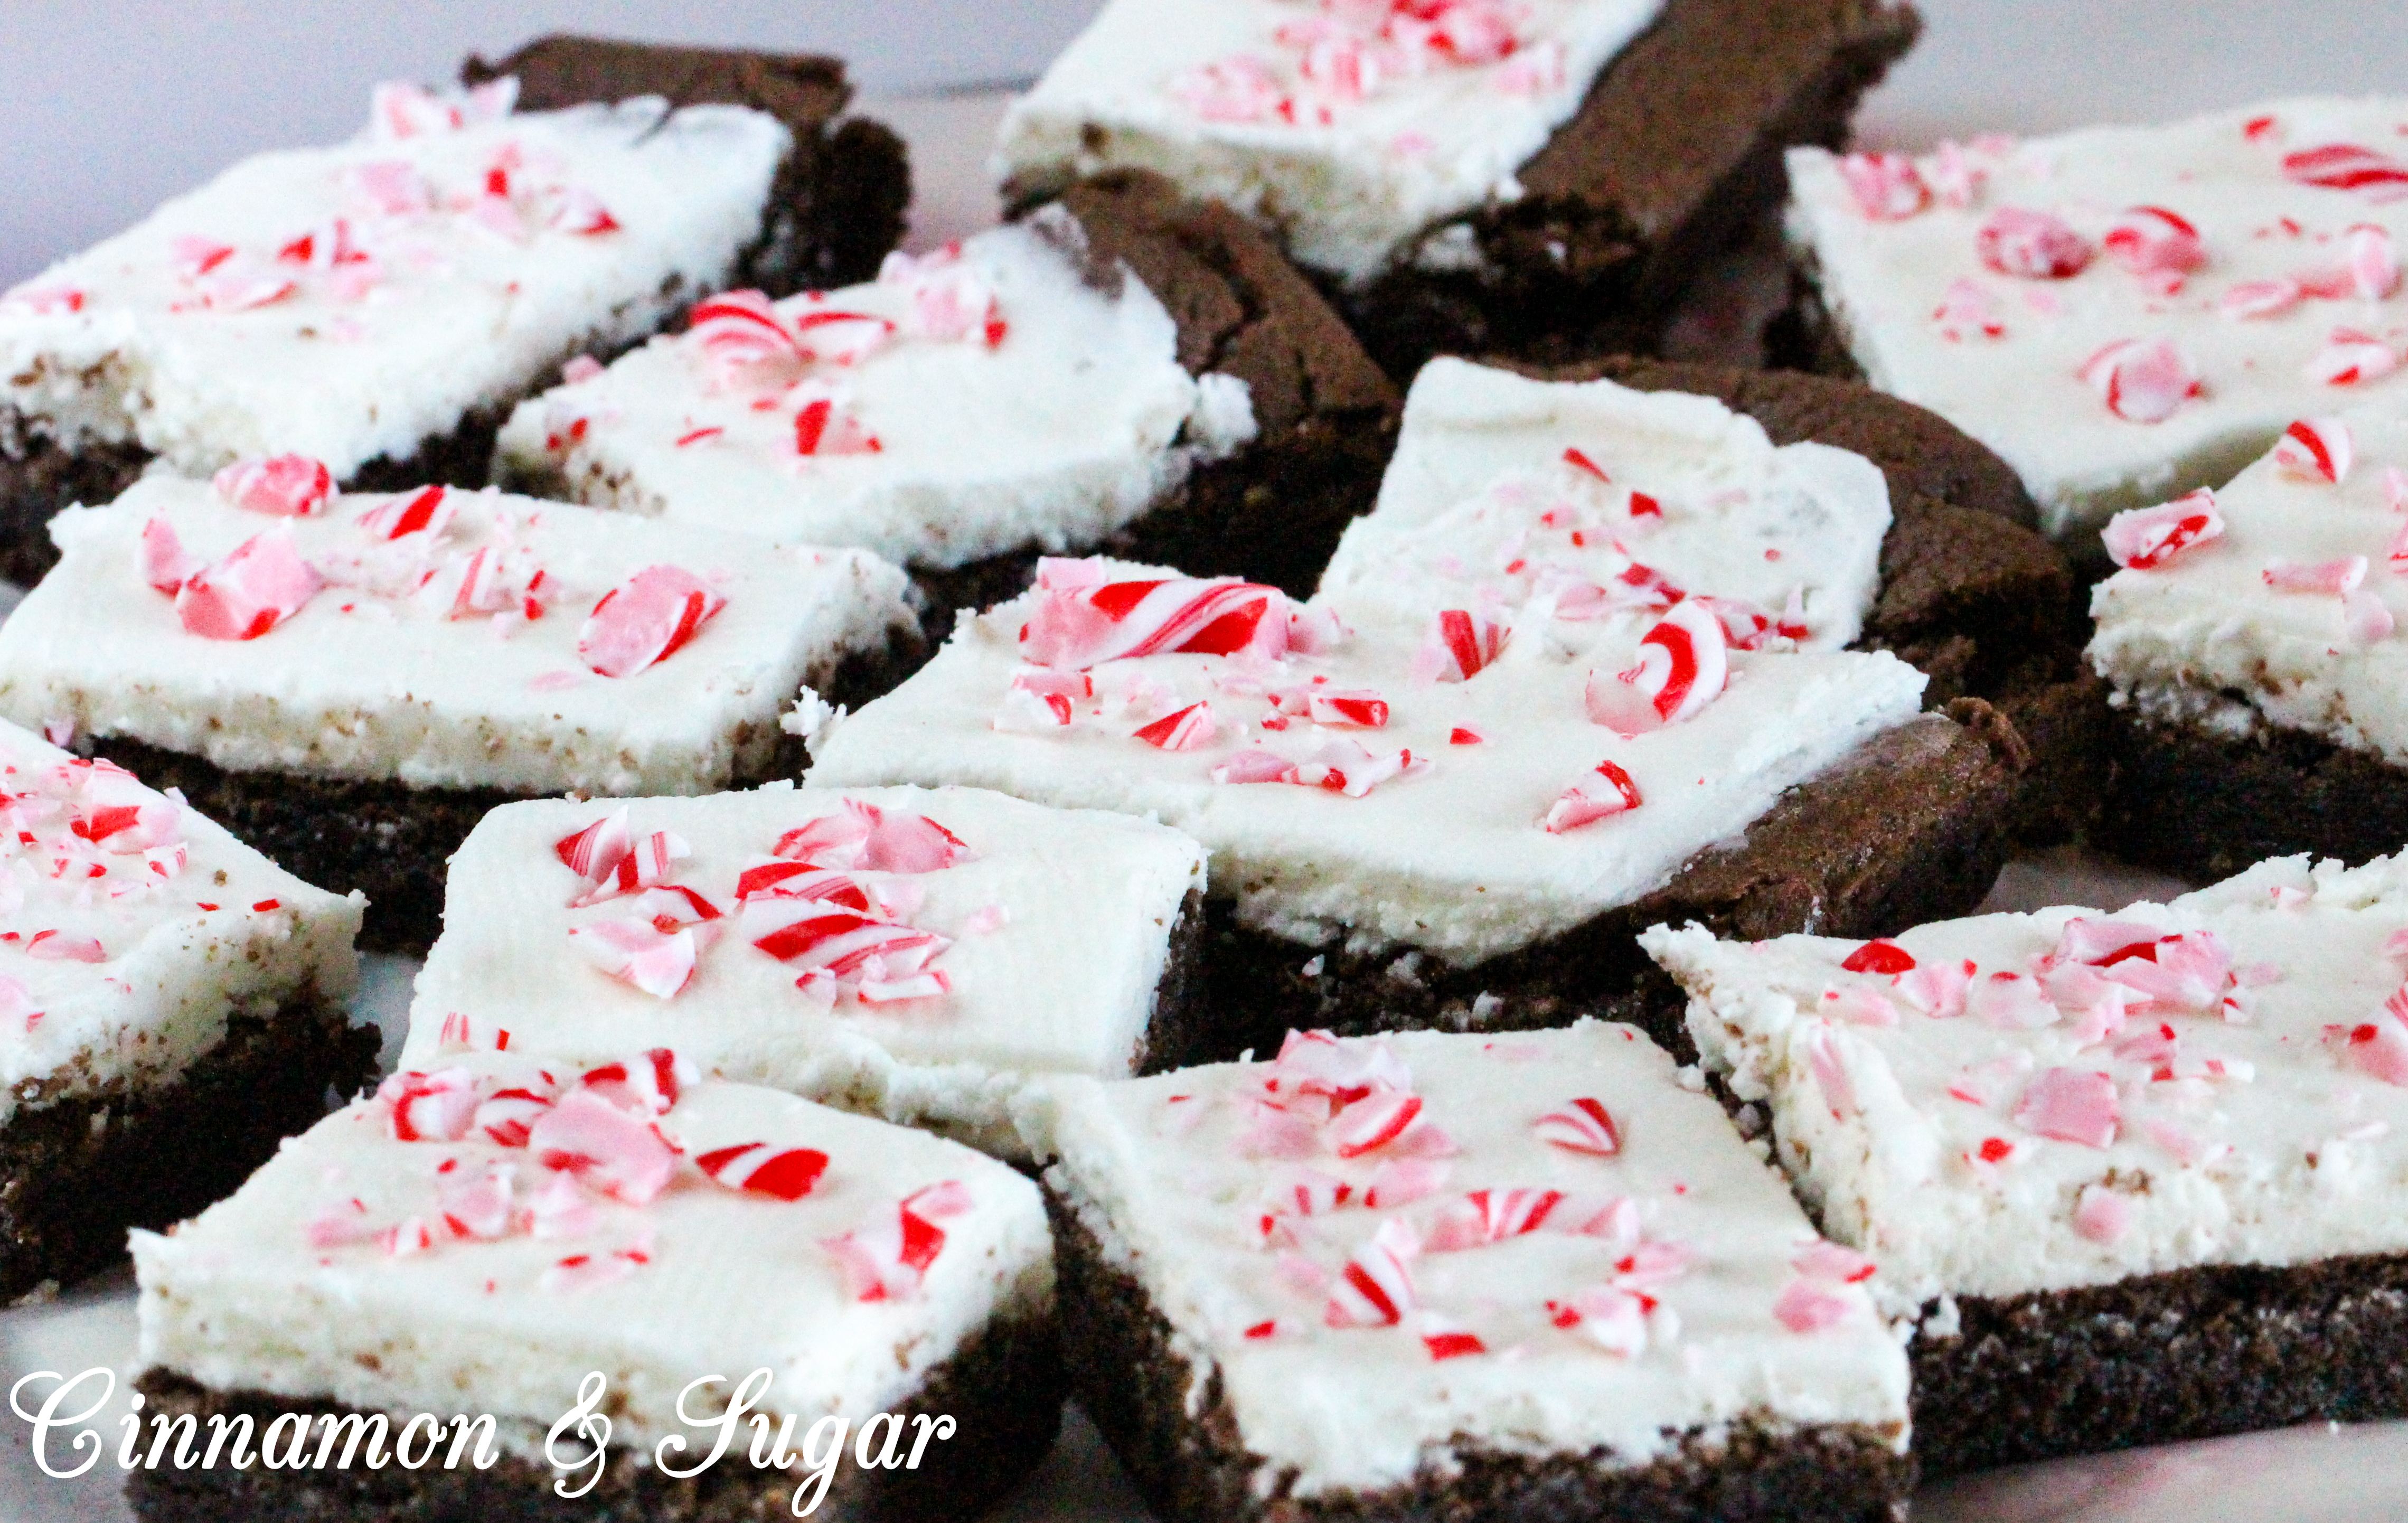 Candy Cane Brownies combine the yummy flavors of chocolate and peppermint while the added crunch of crushed candy canes sprinkled on top of the frosted brownies adds a festive touch. Recipe shared with permission granted by Catherine Bruns, author of GINGER SNAPPED TO DEATH.